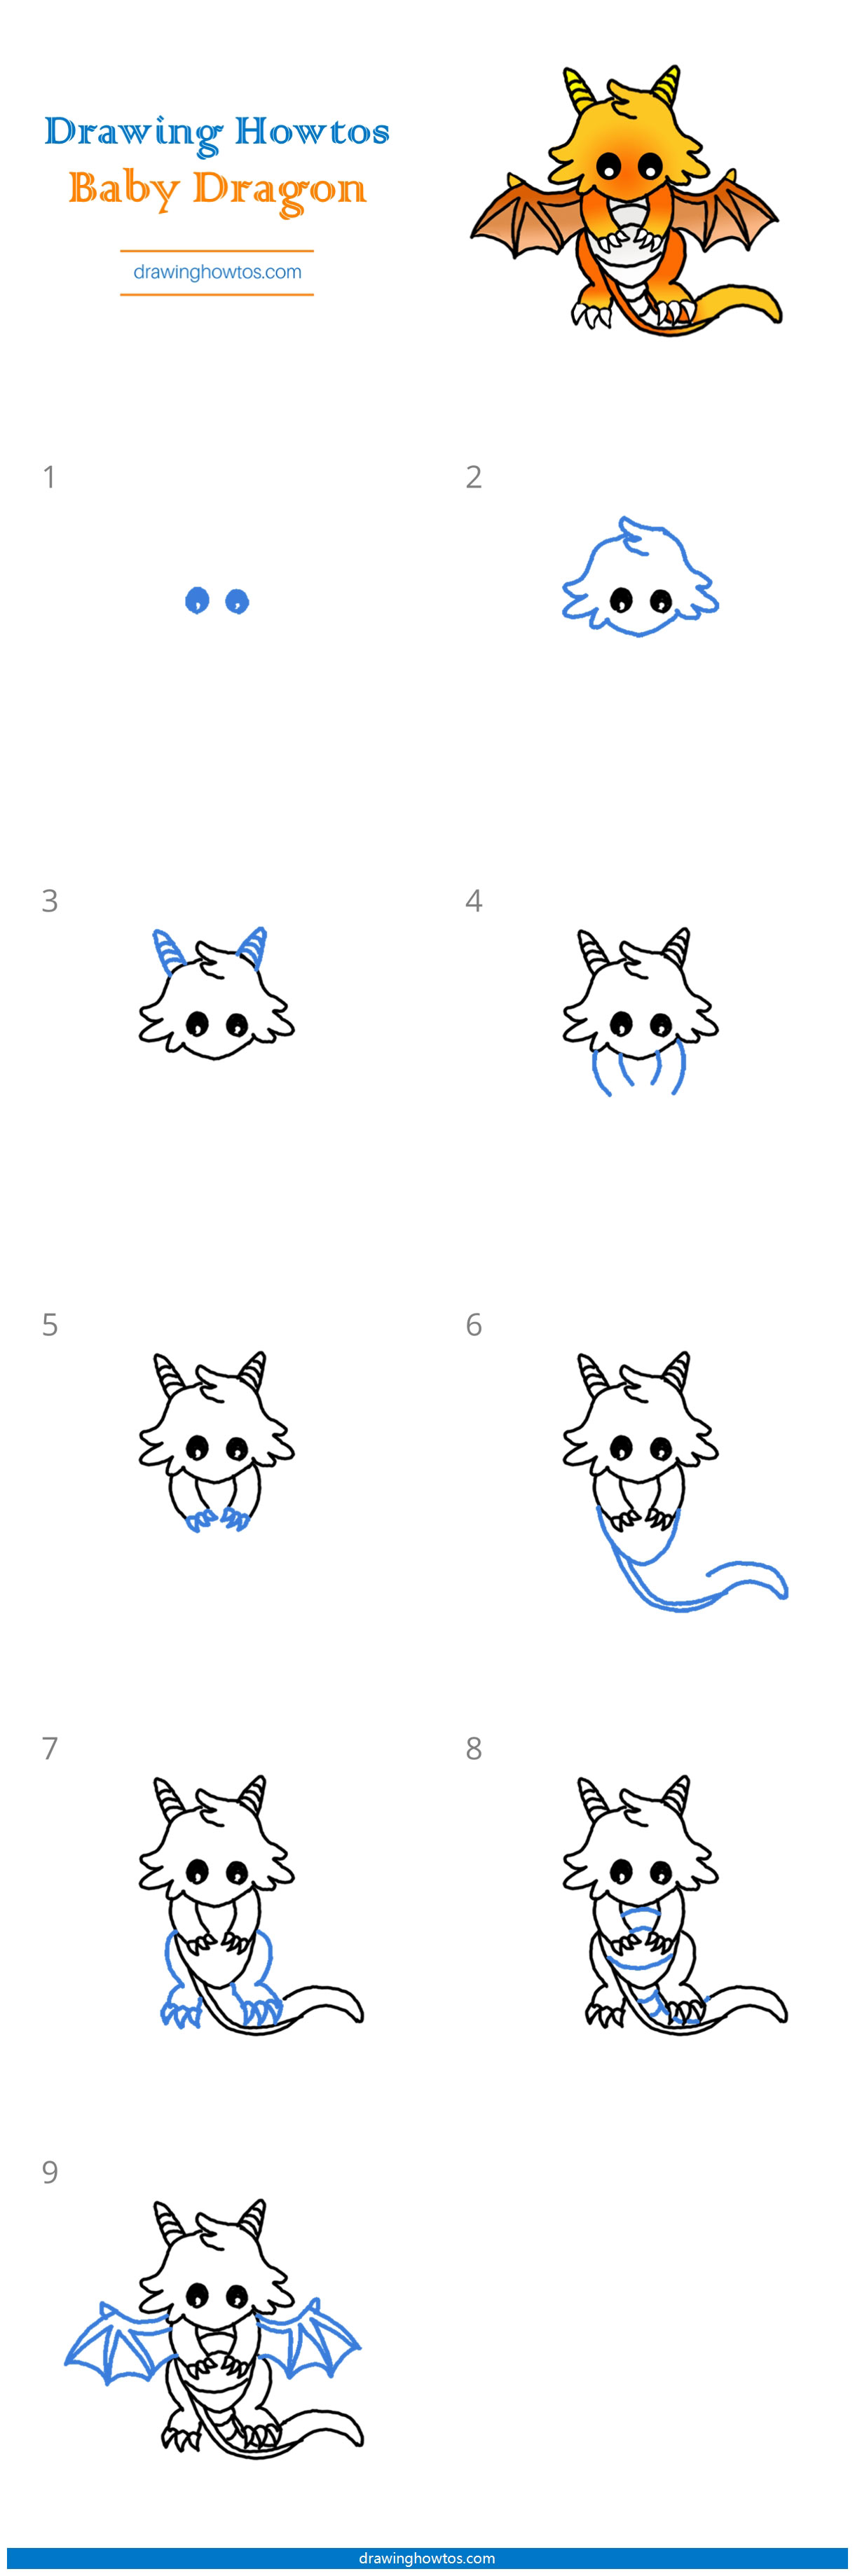 How to Draw a Baby Dragon Step by Step